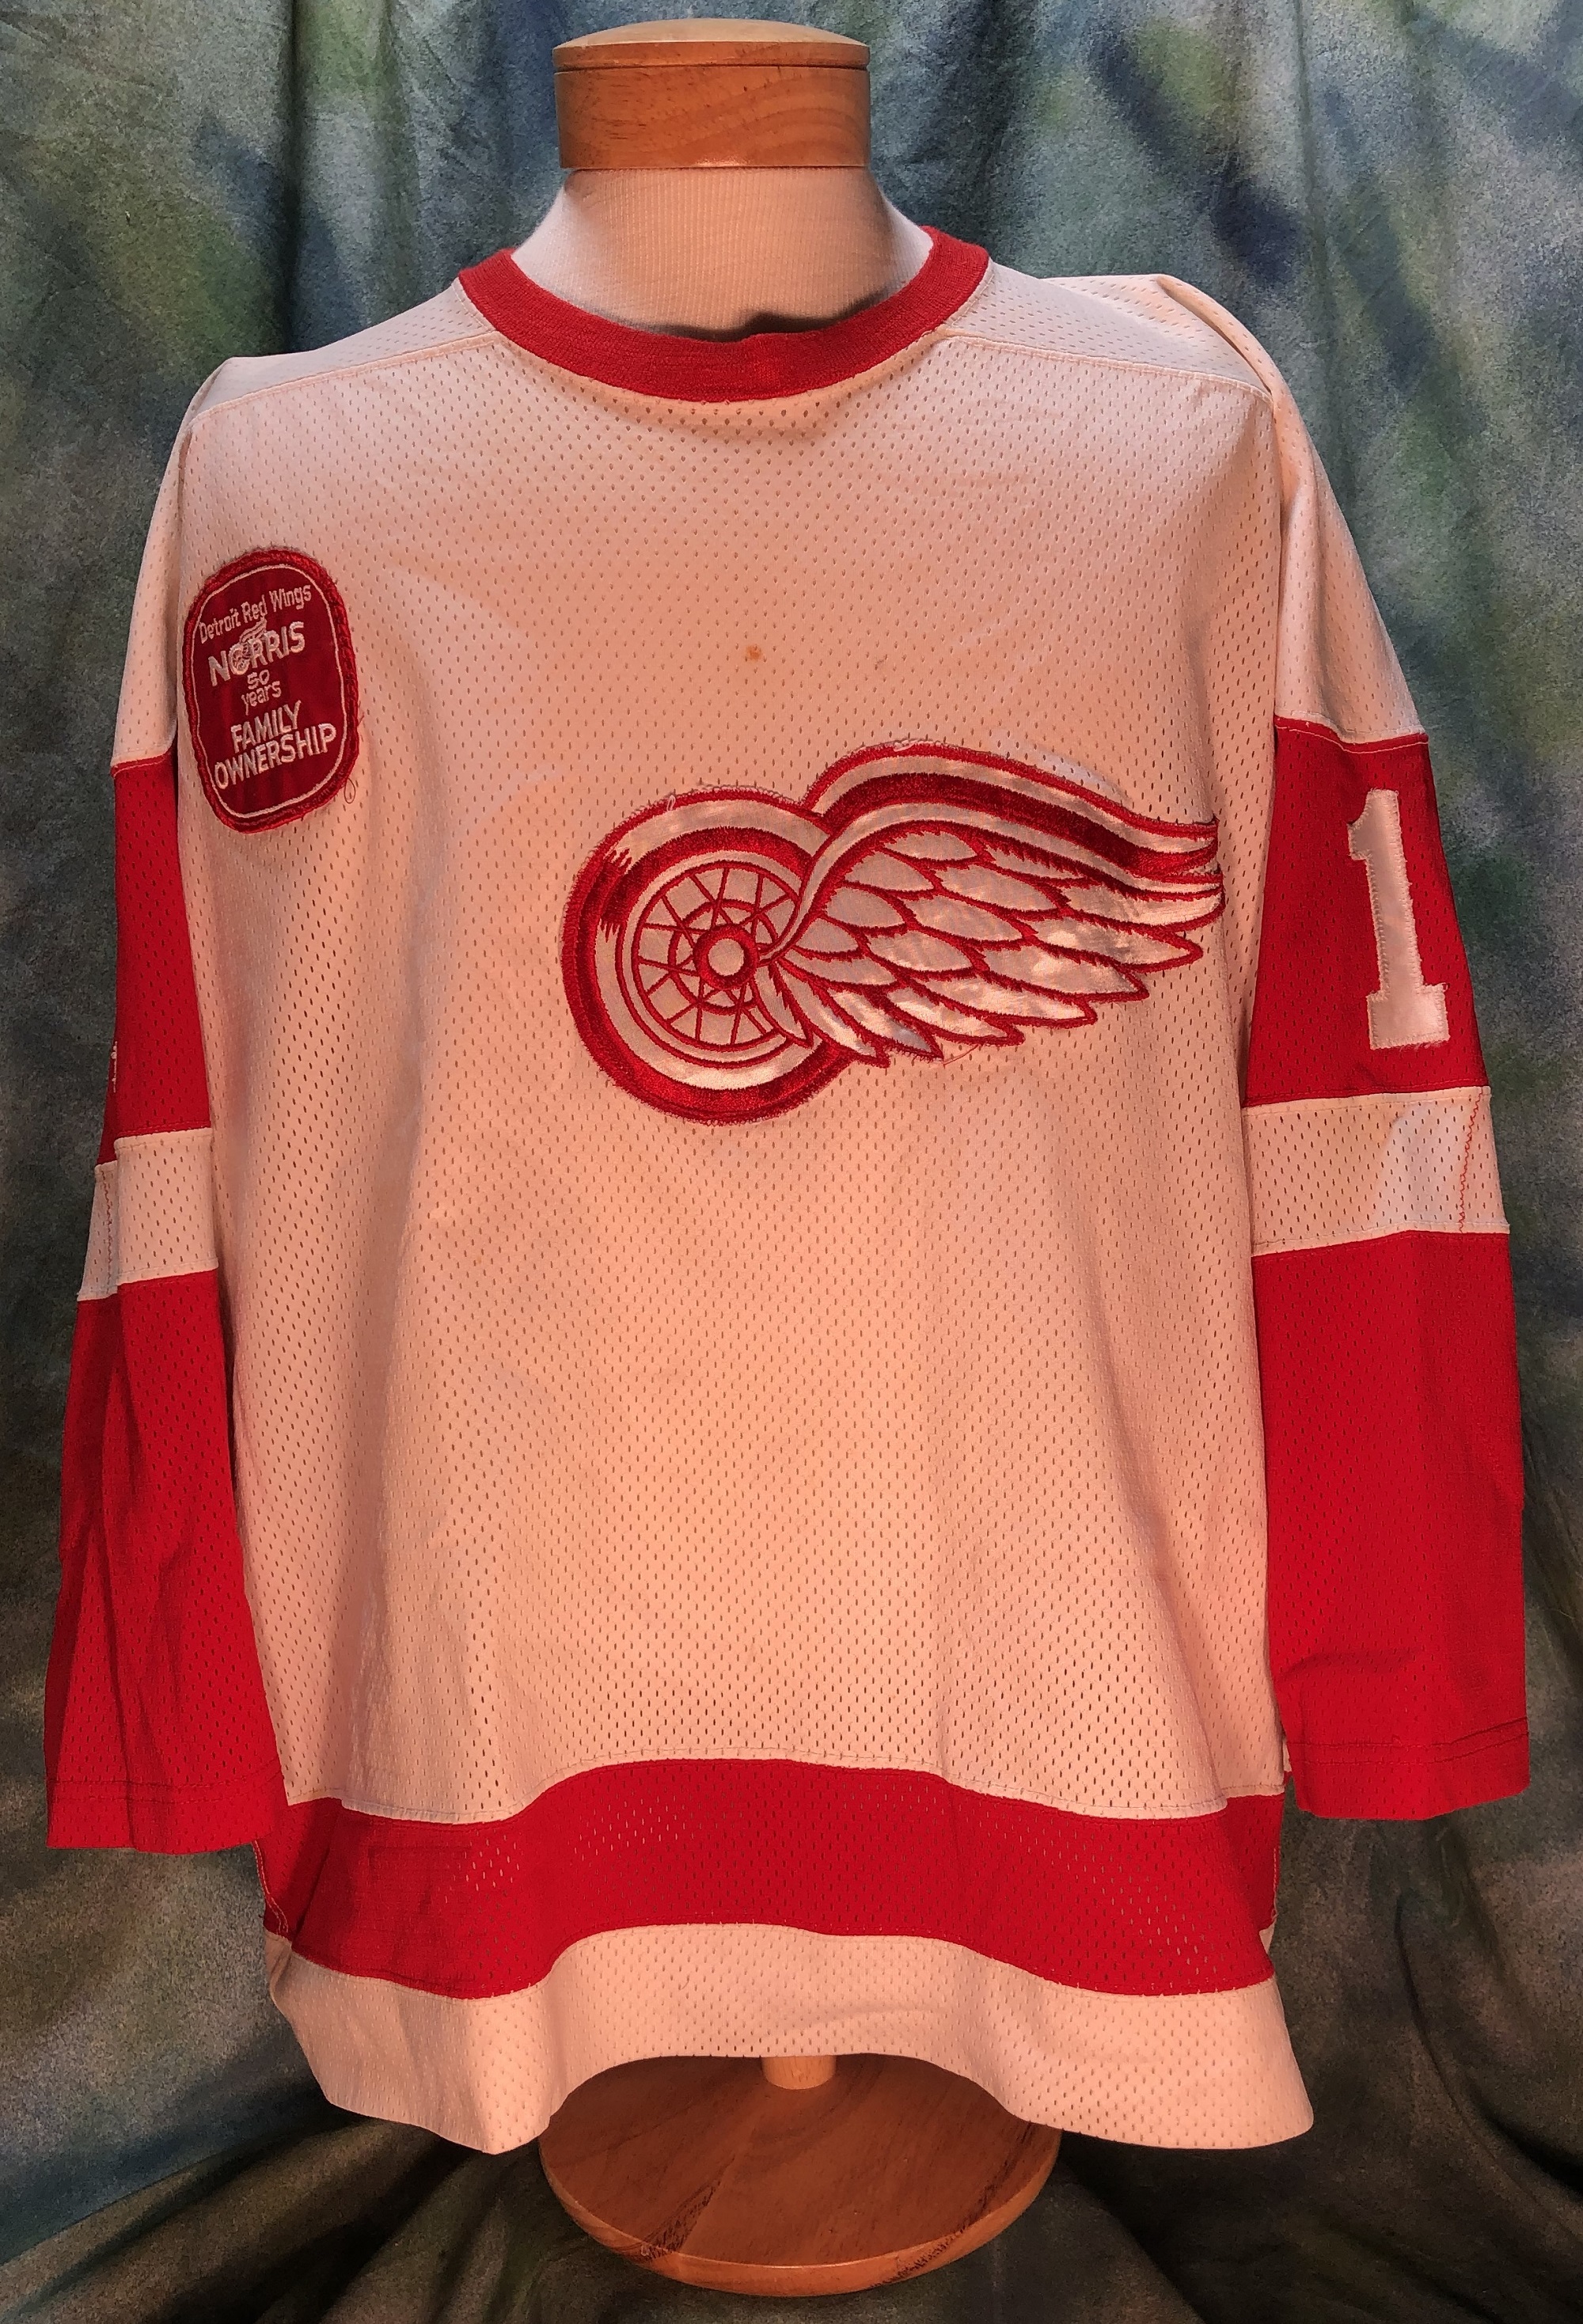 ALTERNATE A OFFICIAL PATCH FOR DETROIT RED WINGS RED JERSEY